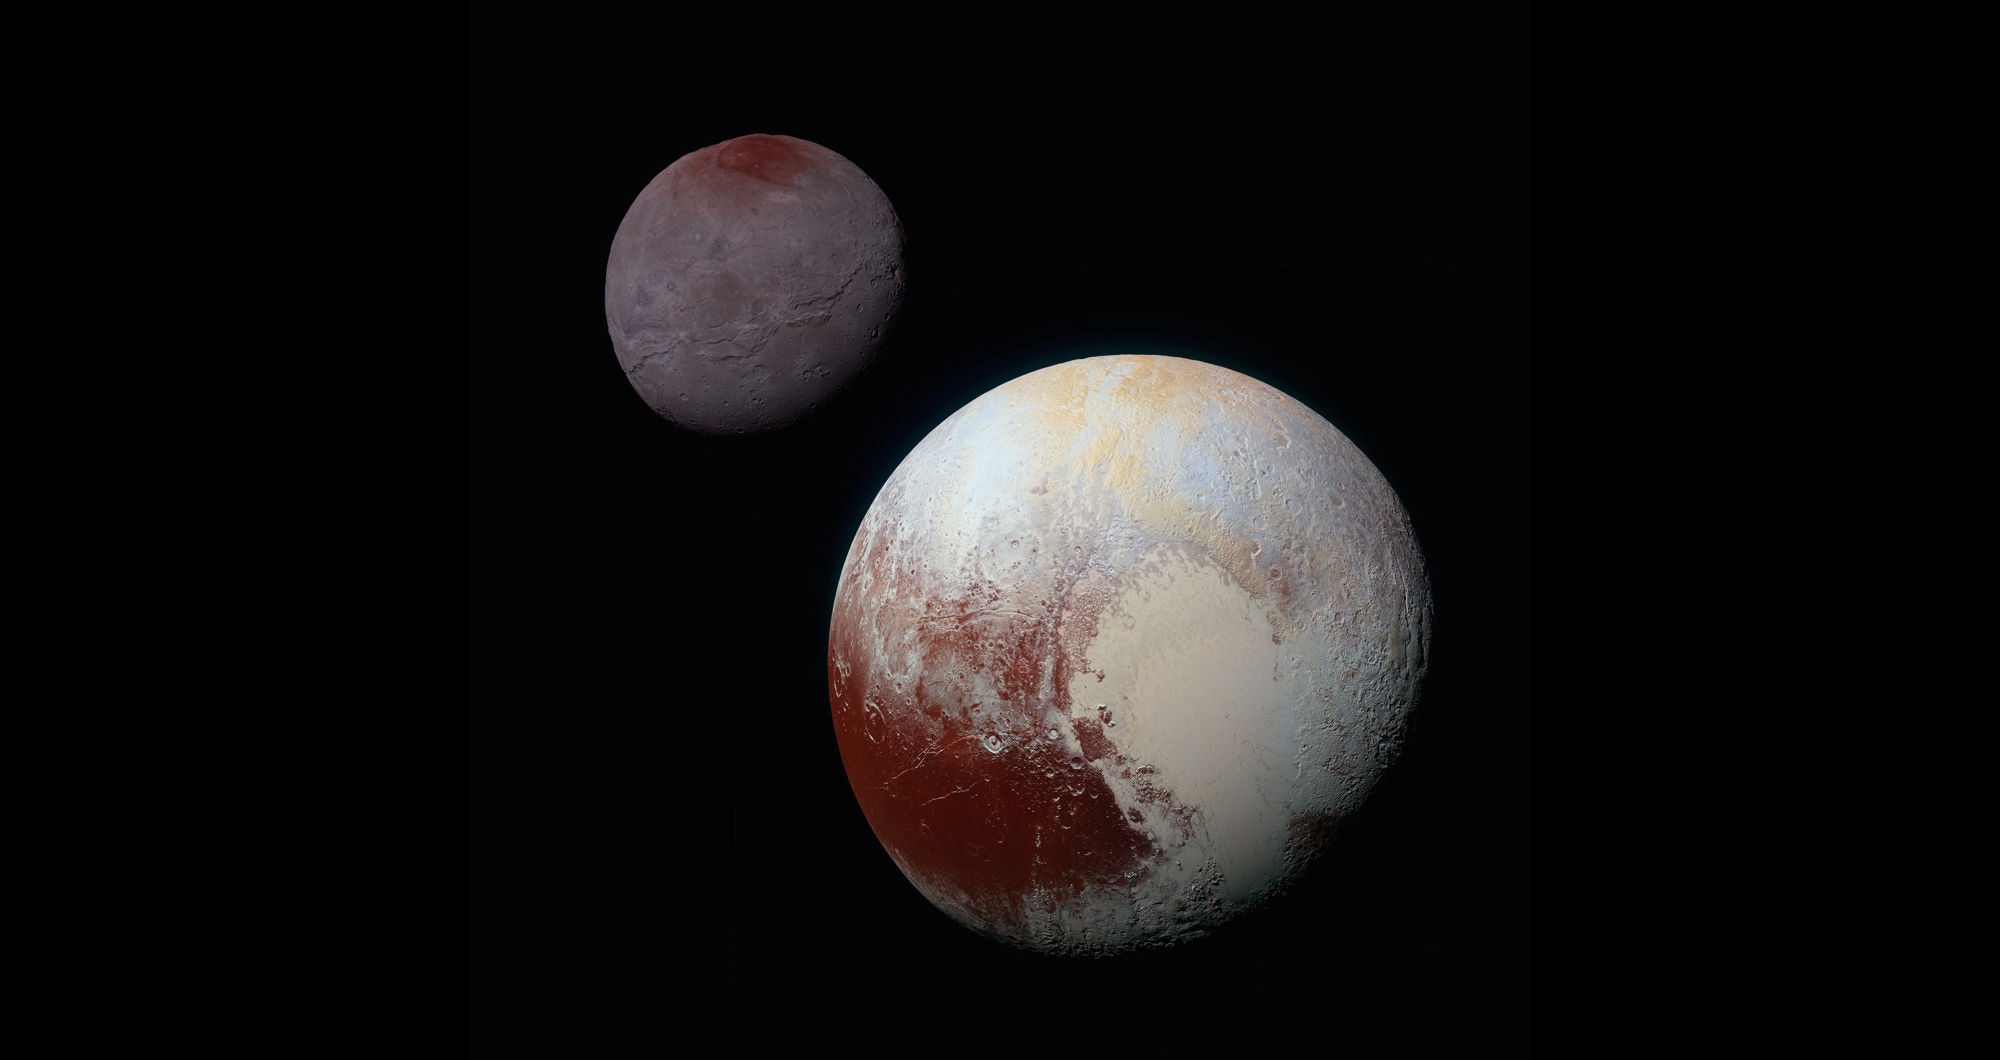 Actual images of Pluto and its large moon Charon, shown to scale and with correct contrast, from New Horizon observations. Credit: NASA/JHUAPL/SwRI